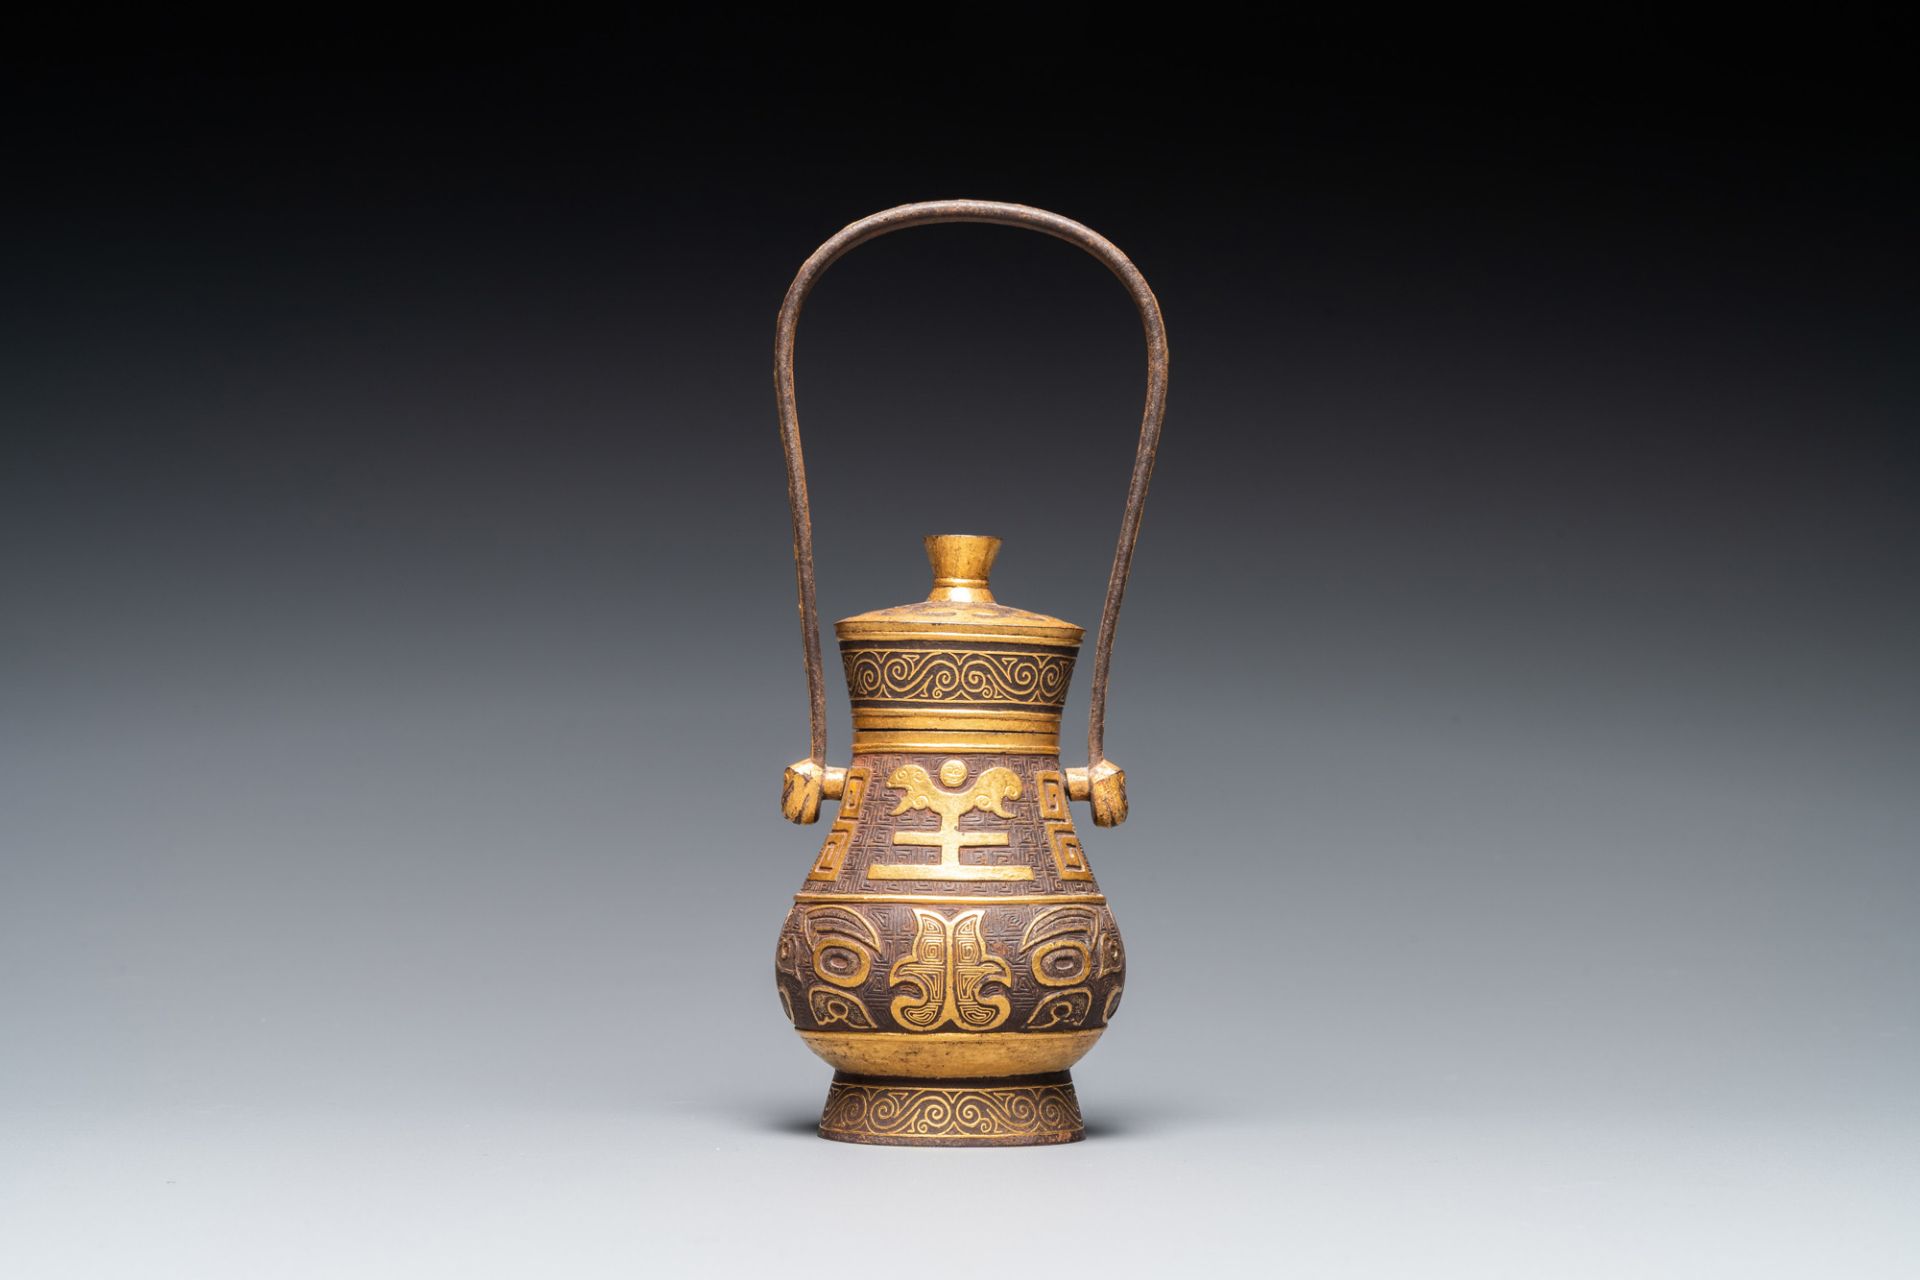 A Chinese gold-leaf-decorated cast iron vase and cover, probably 19th C. - Image 2 of 7